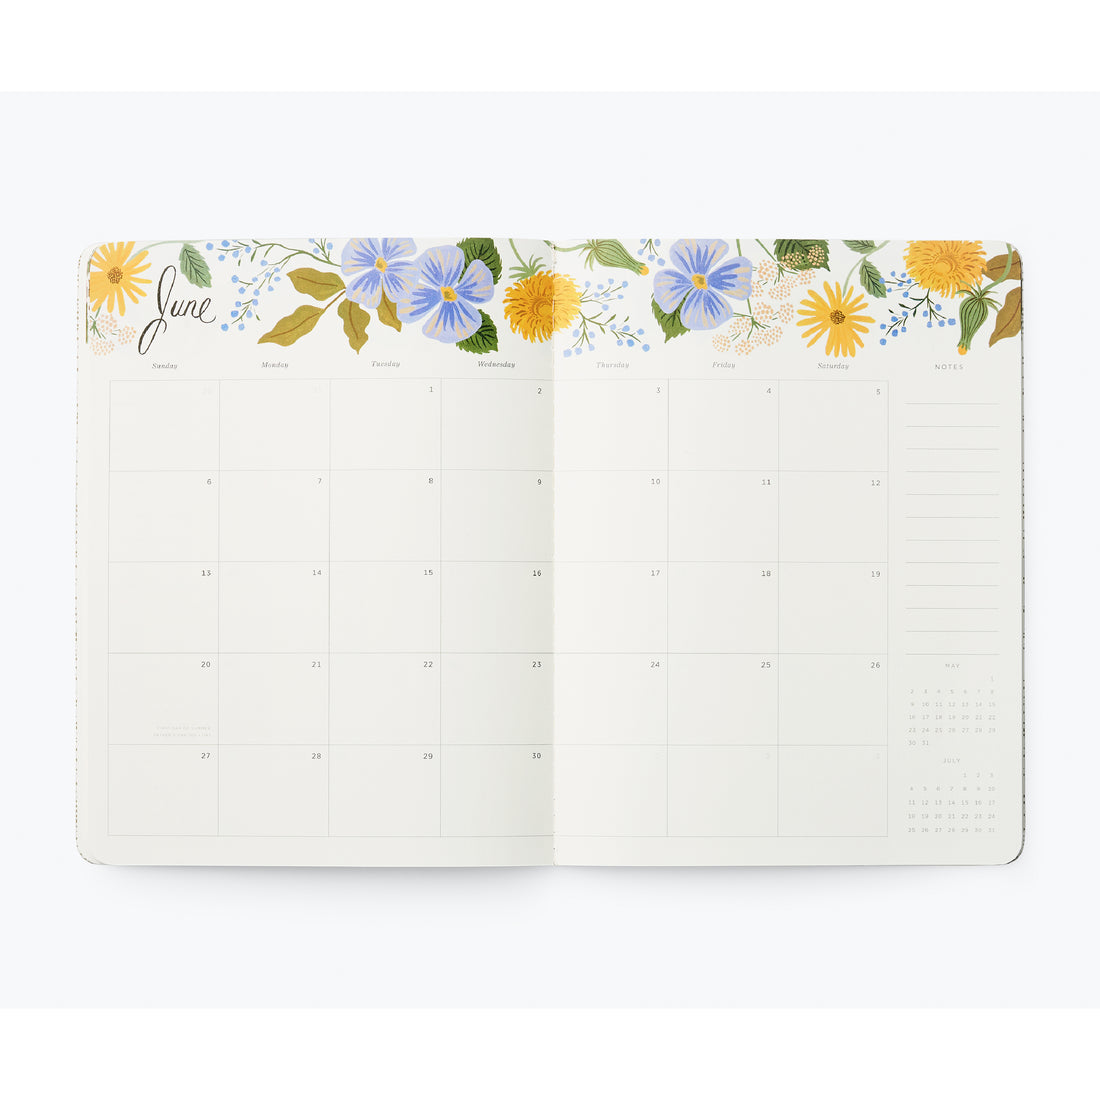 rifle-paper-co-2021-wild-garden-appointment-planner- (6)